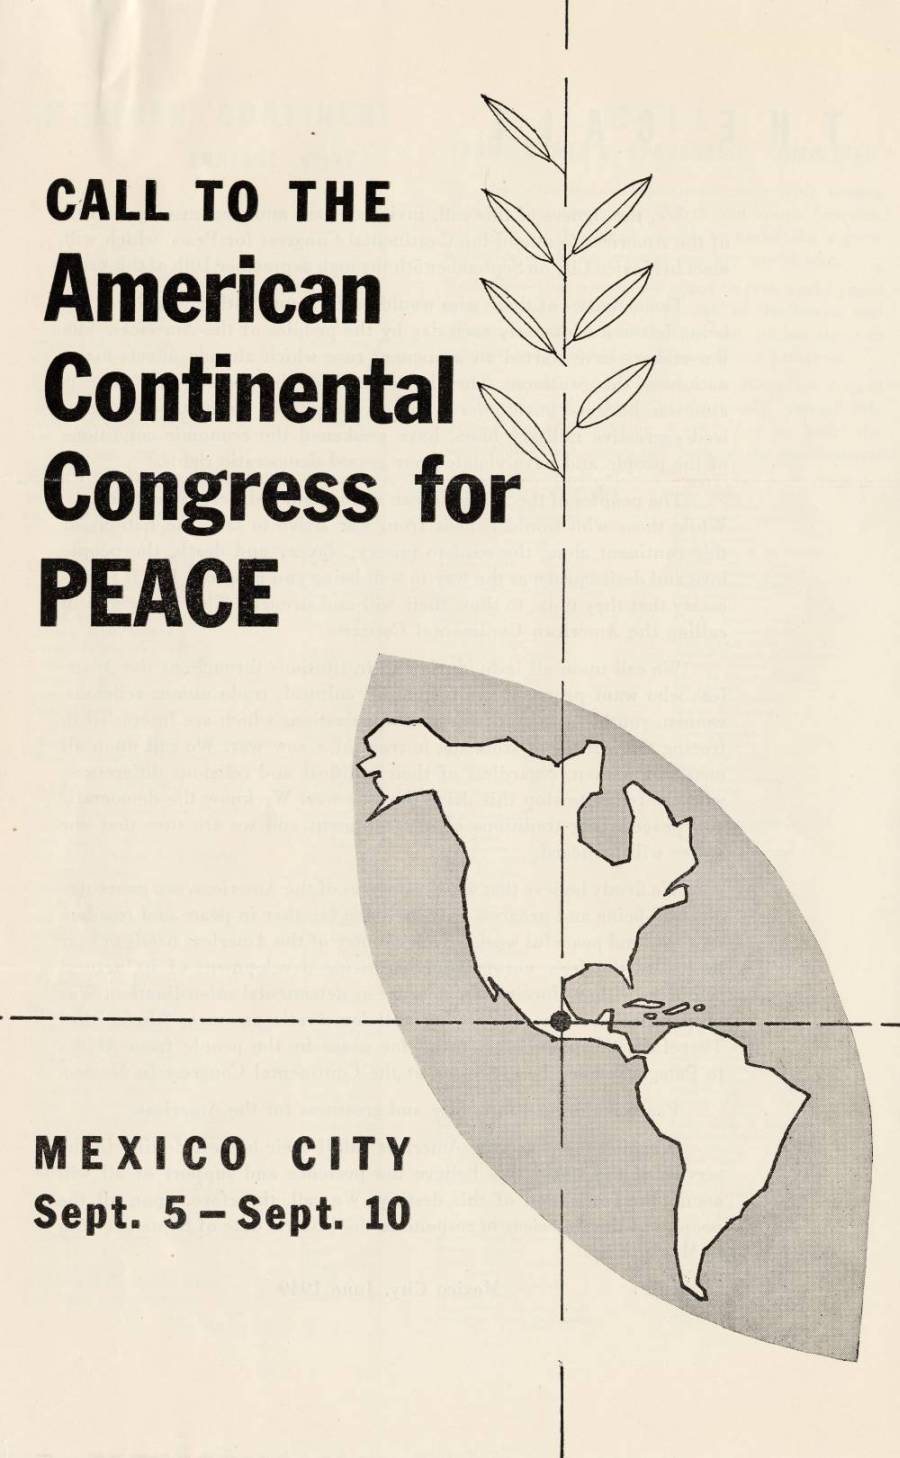 "Call to the American Continental Congress for Peace."